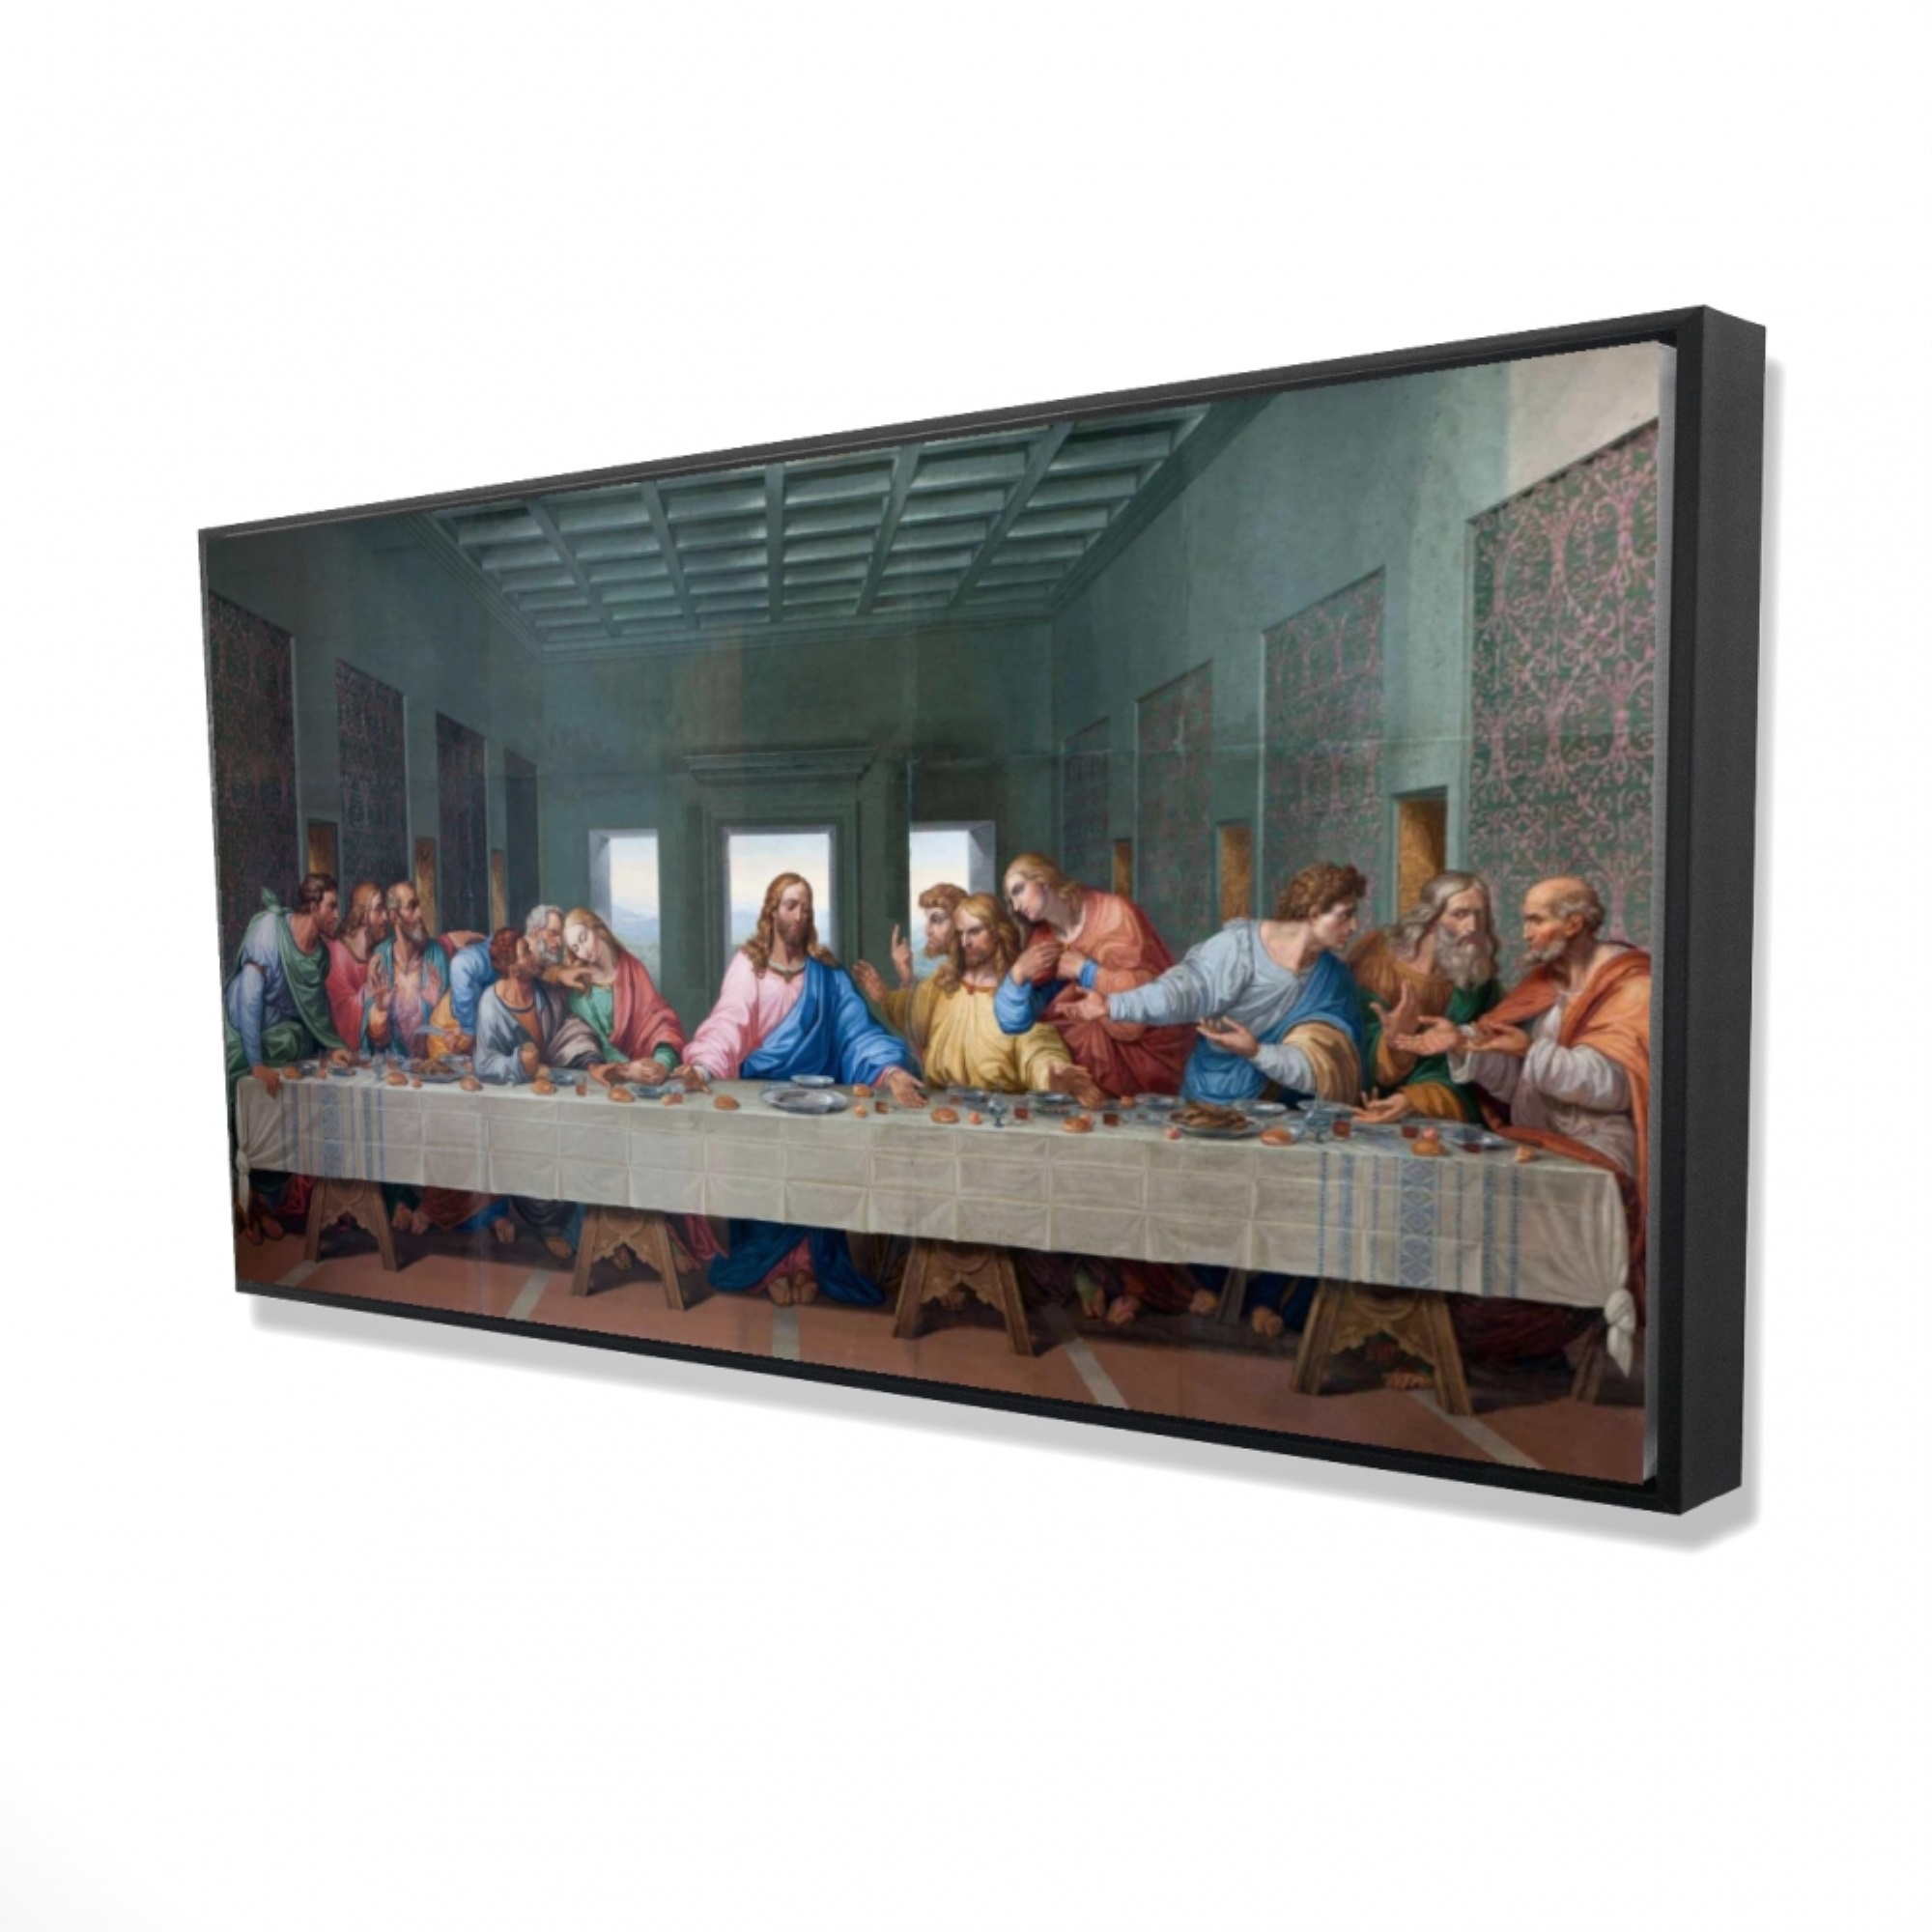 Begin The Last Supper - Framed Print on canvas by Begin Edition